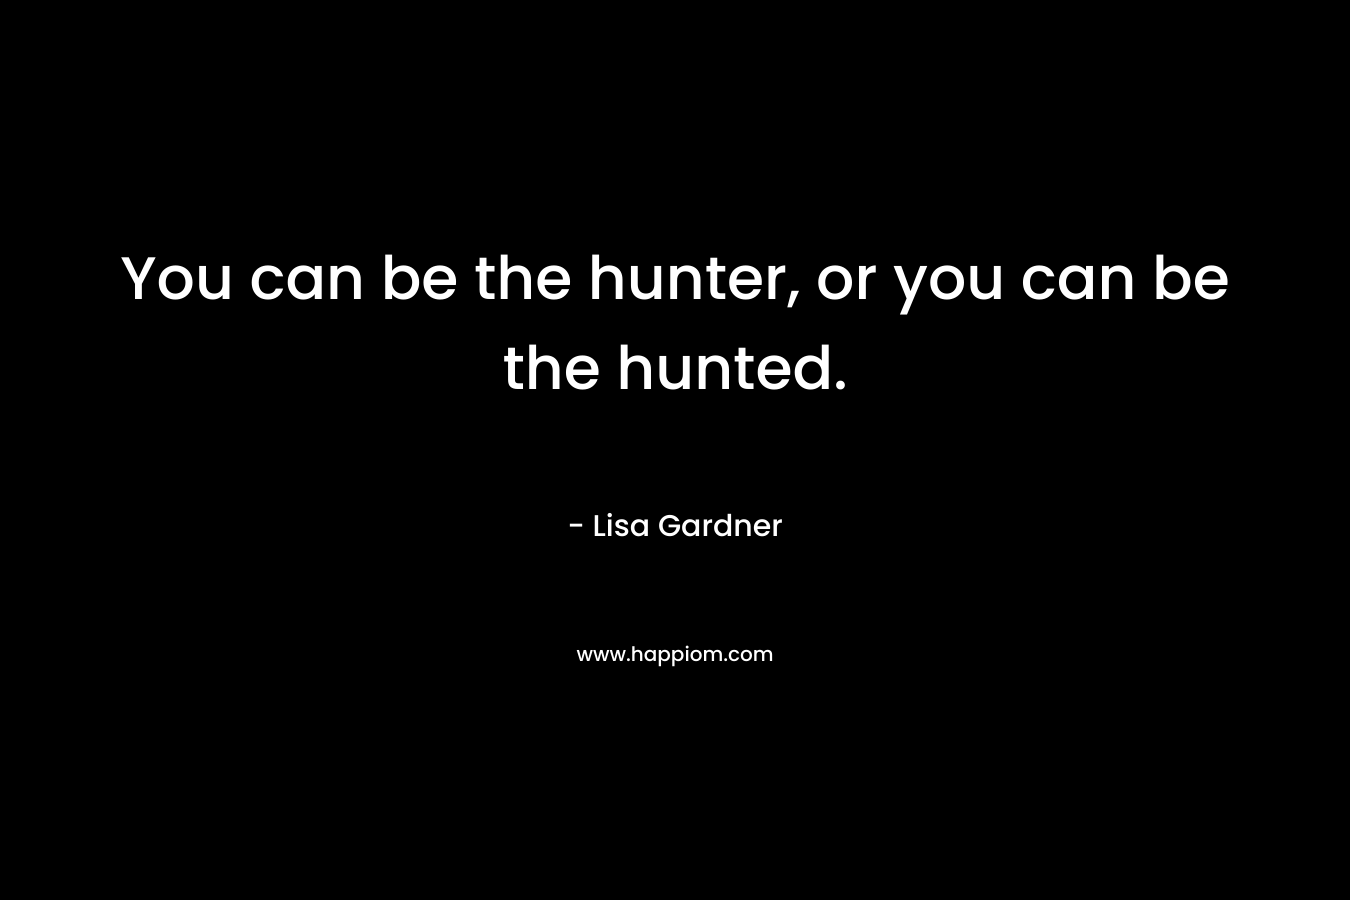 You can be the hunter, or you can be the hunted.